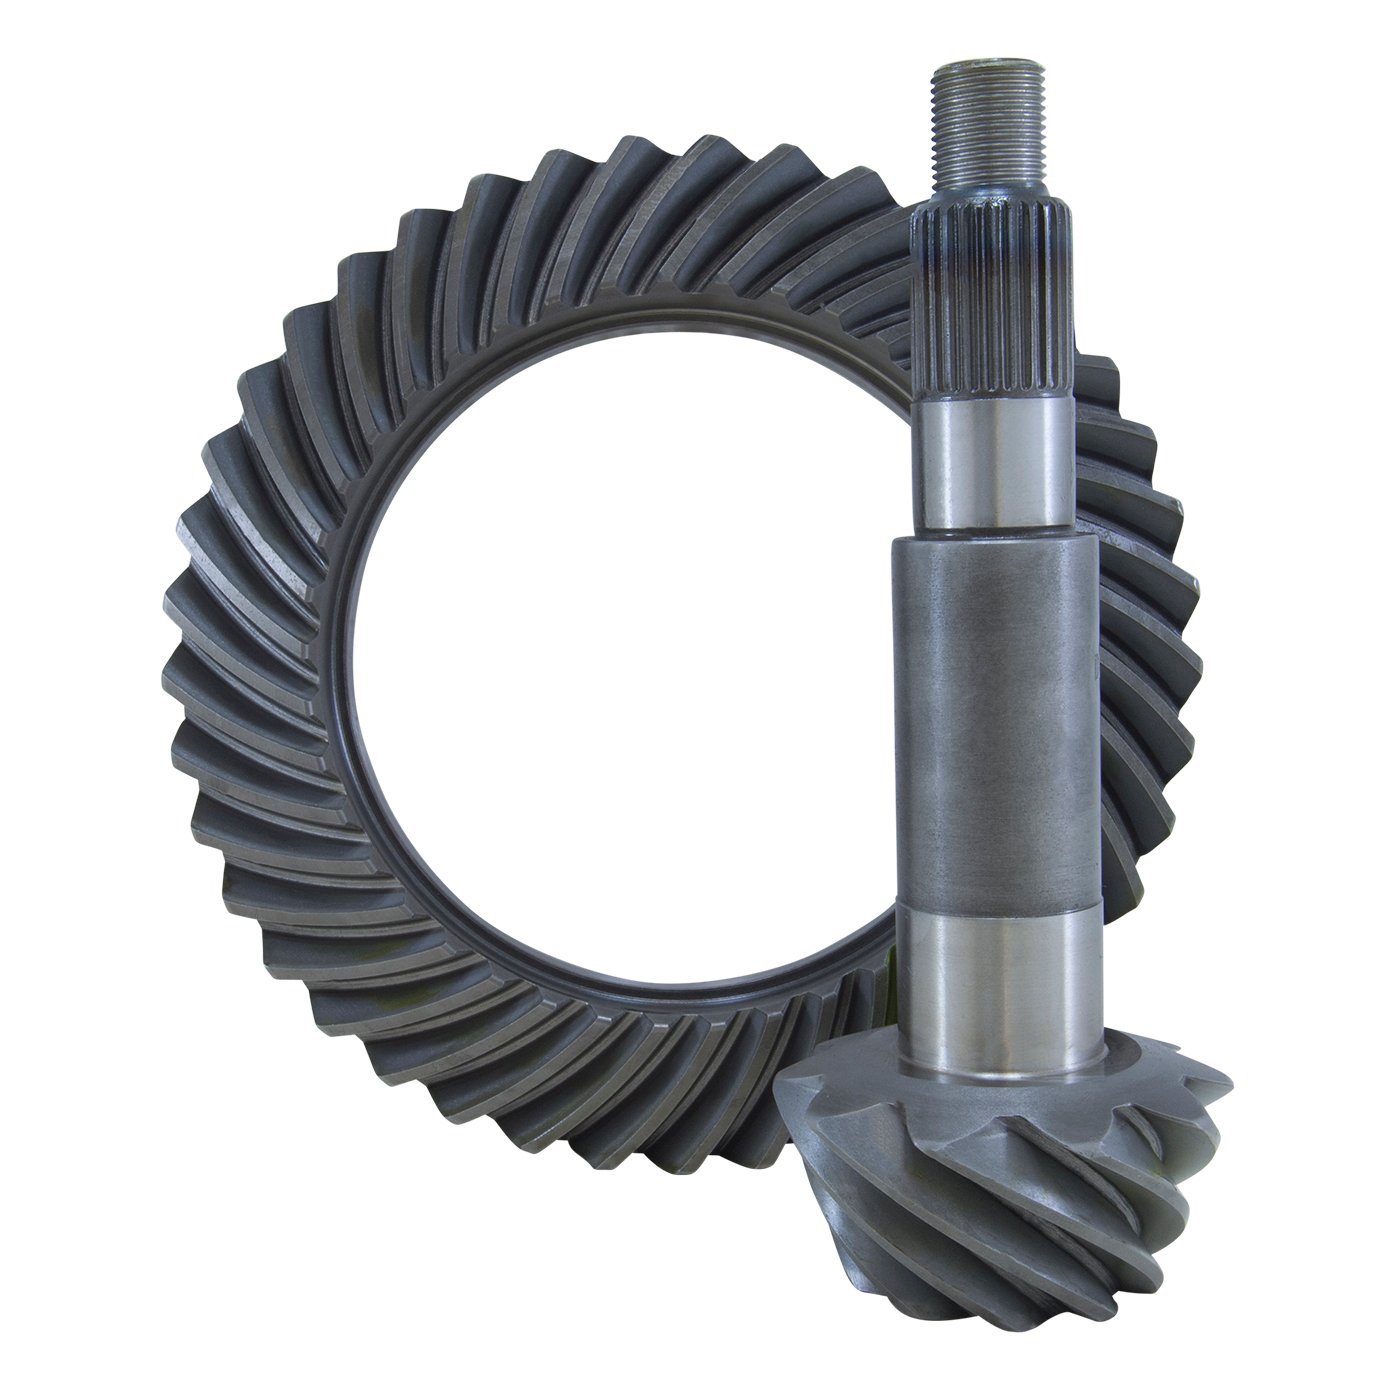 USA Standard ZG D60-373 Replacement Ring & Pinion Gear Set, For Dana 60, 3.73 Ratio